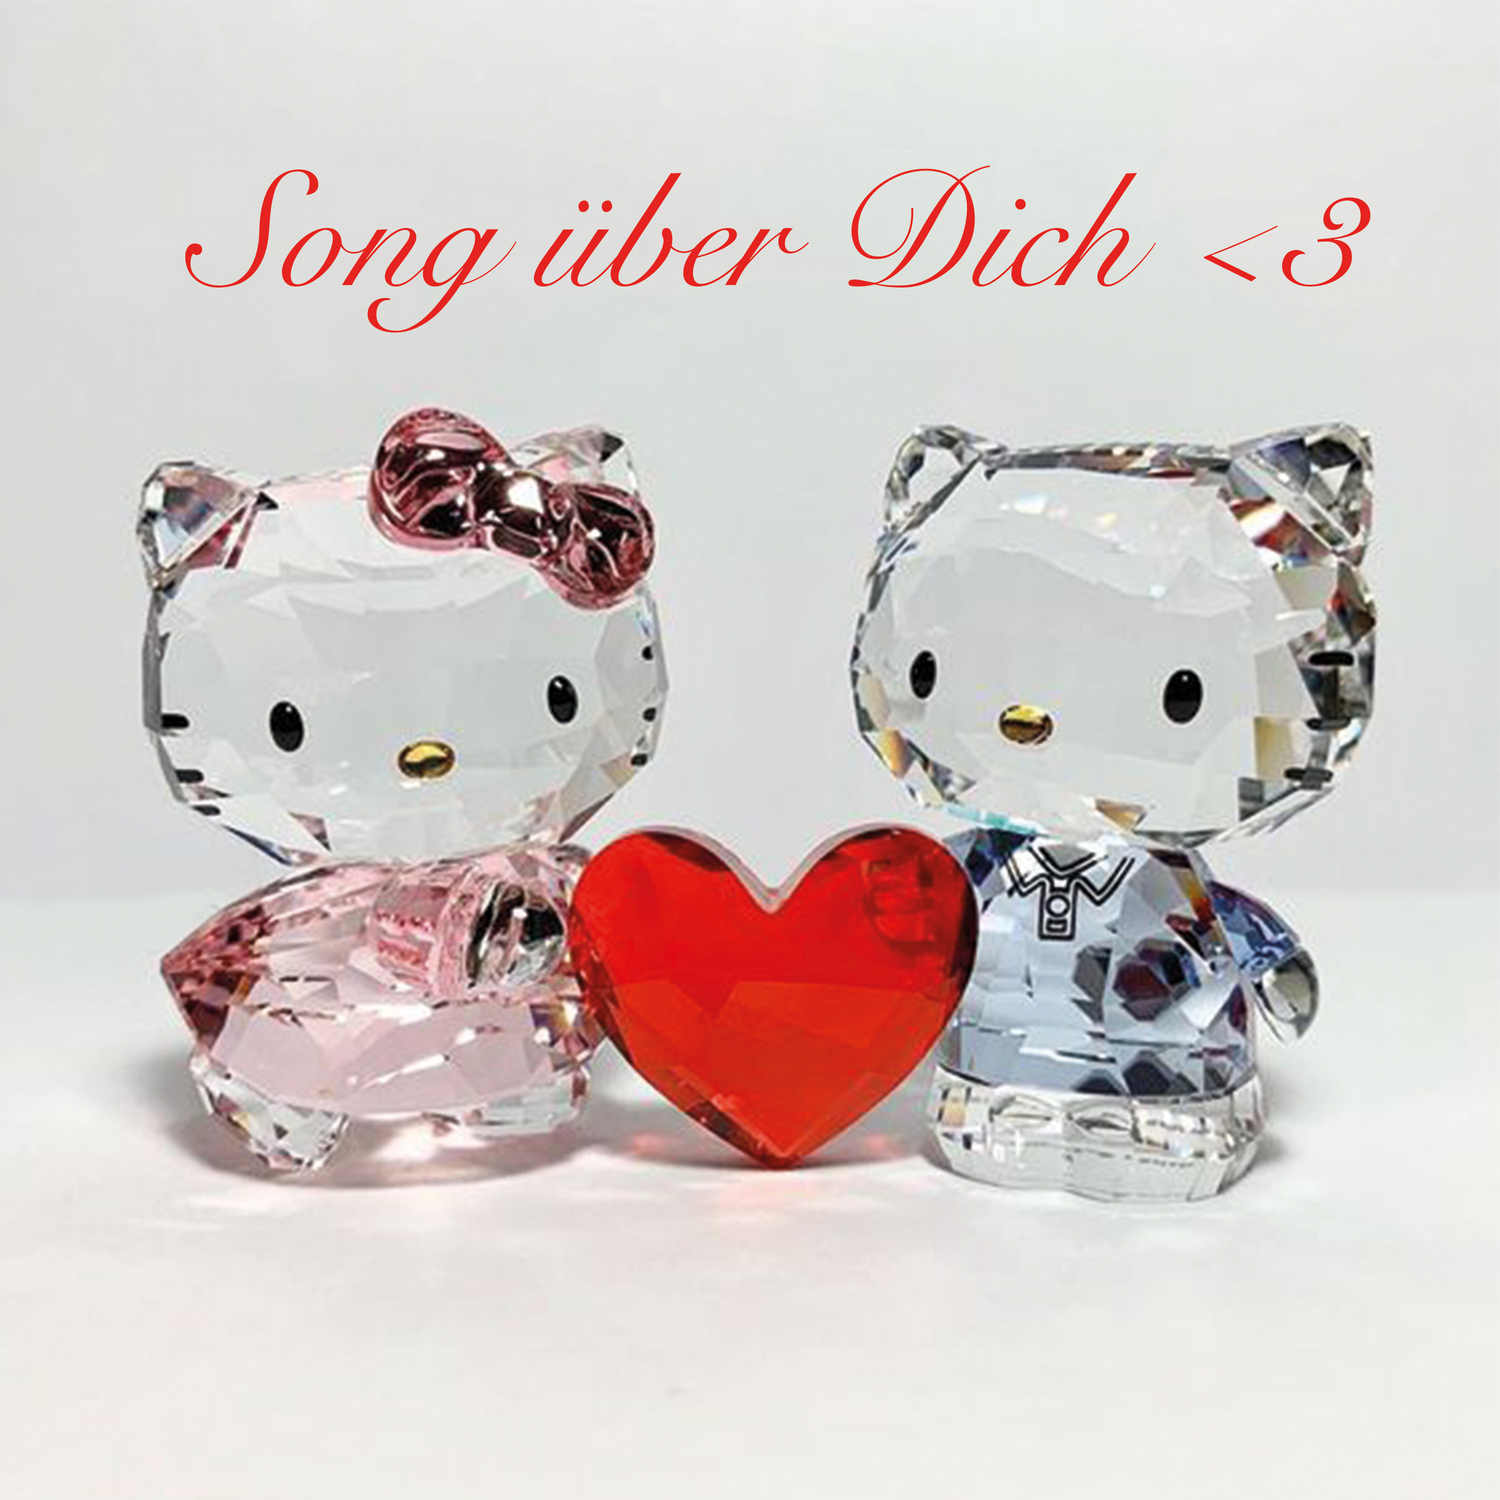 Song über dich (EP)